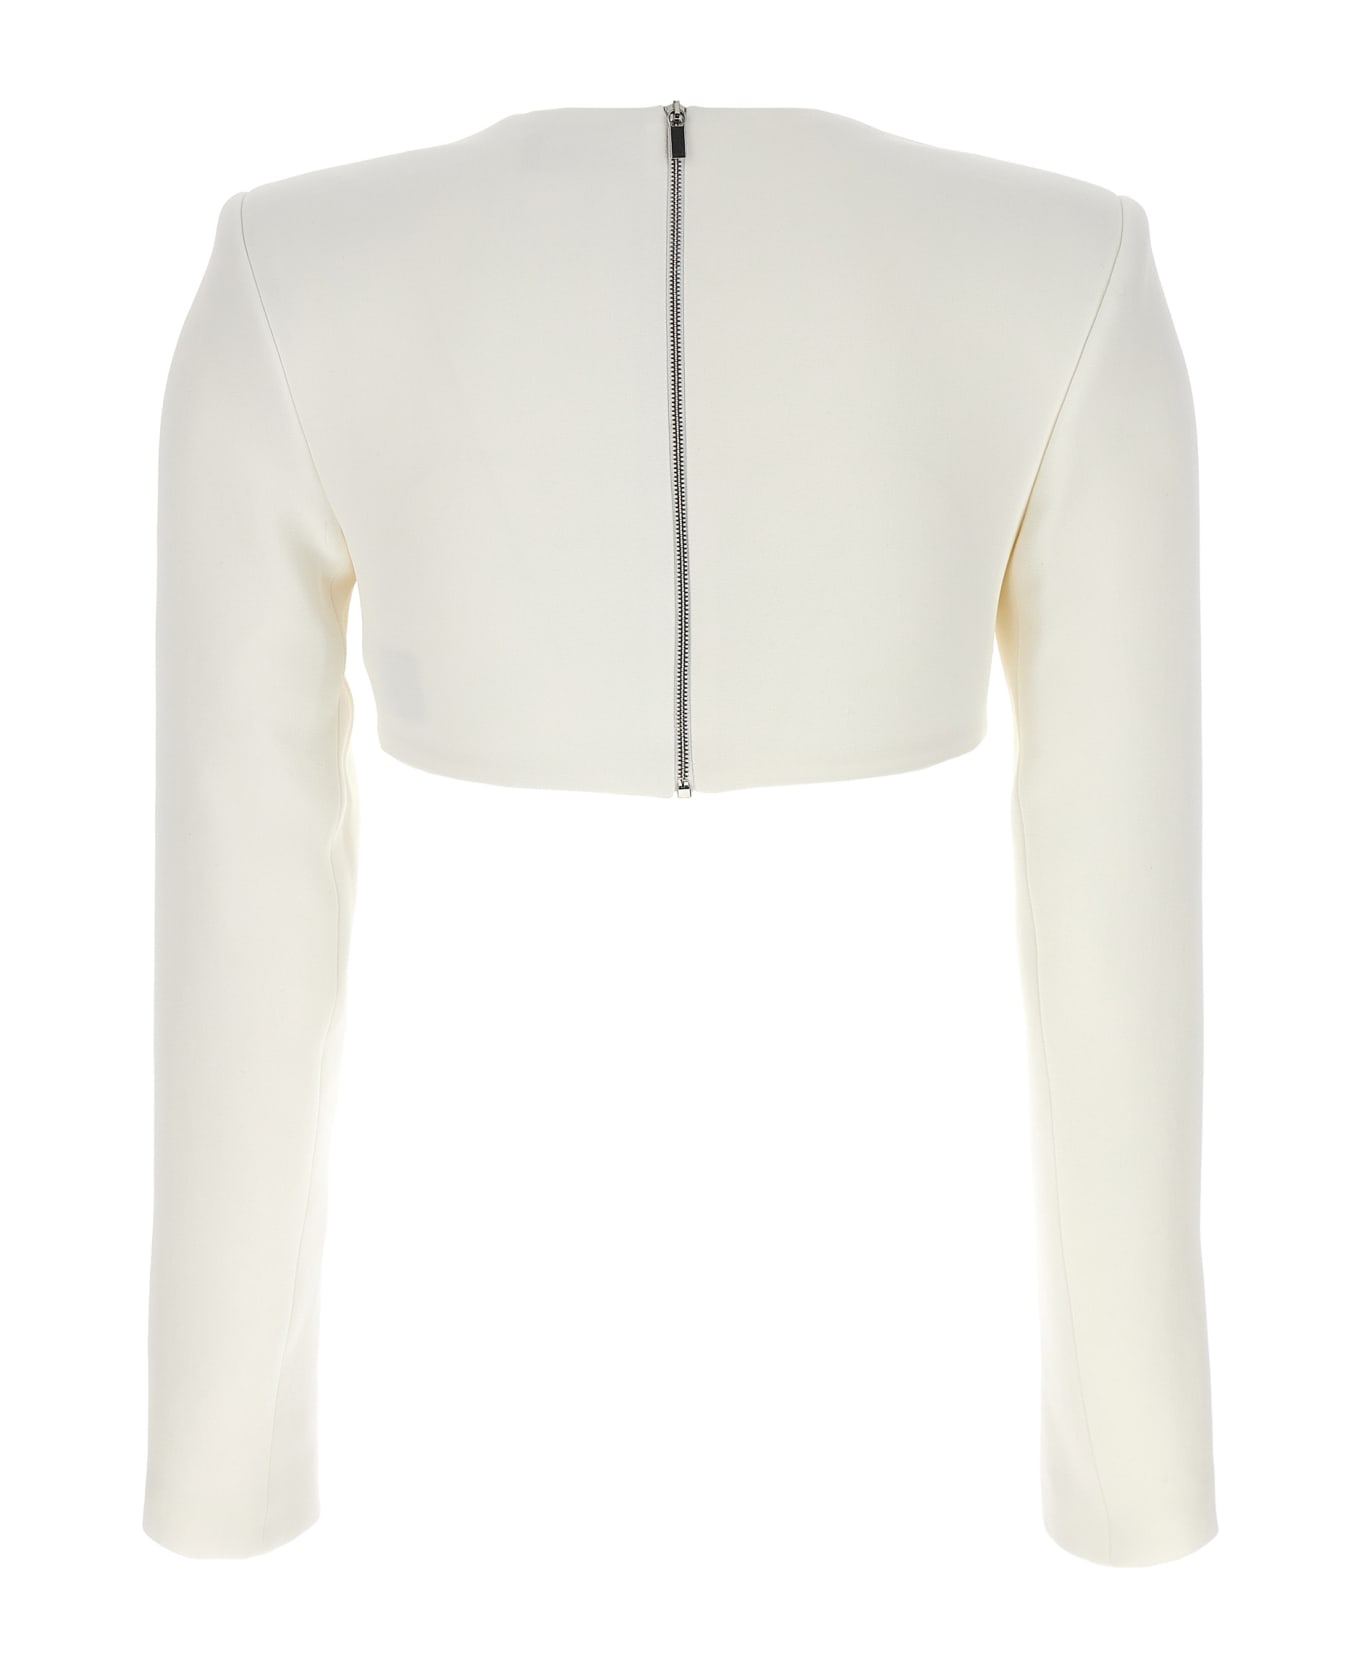 David Koma Top '3d Crystsal Chain And Square Neck' - White トップス